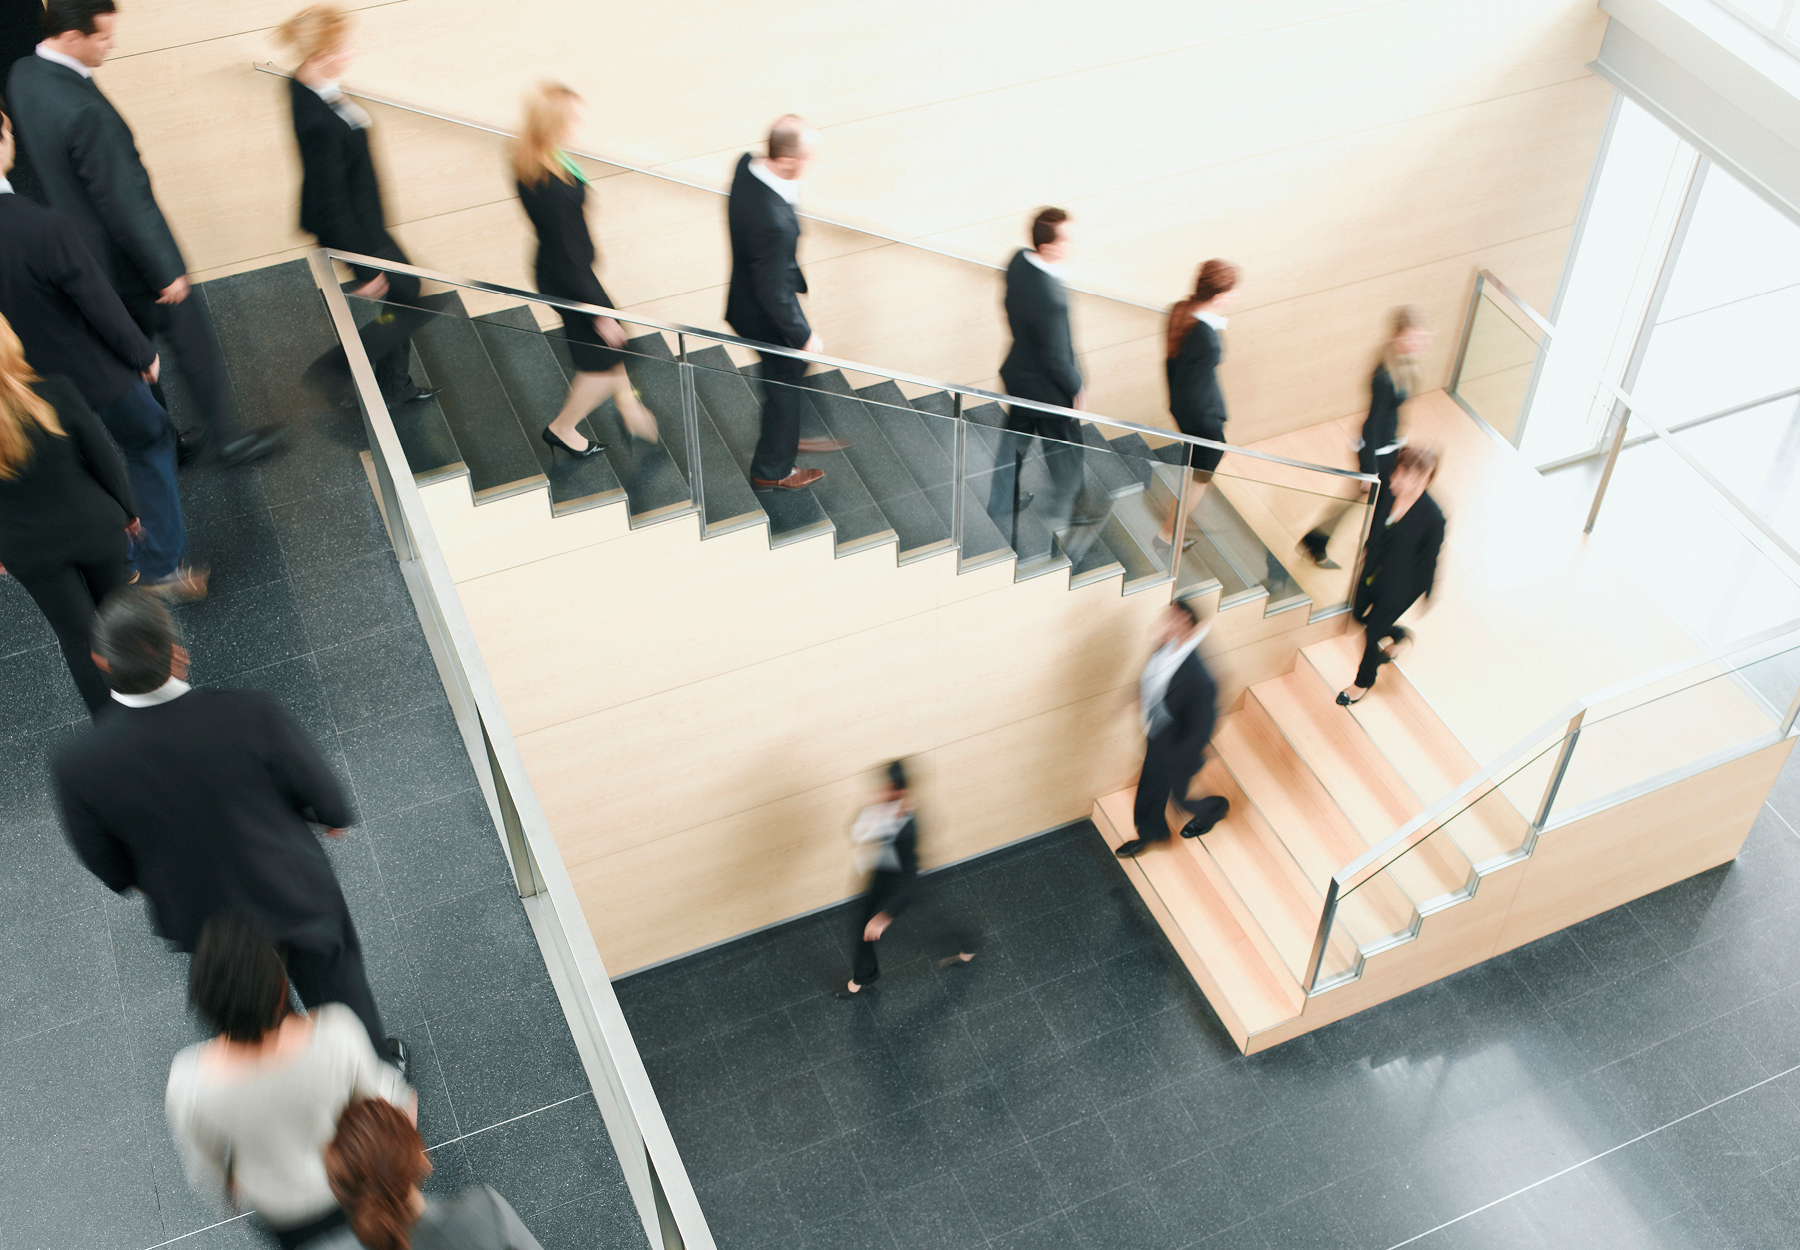 People in business attire walk down the stairs of an office building. Layoffs concept. iStock image.